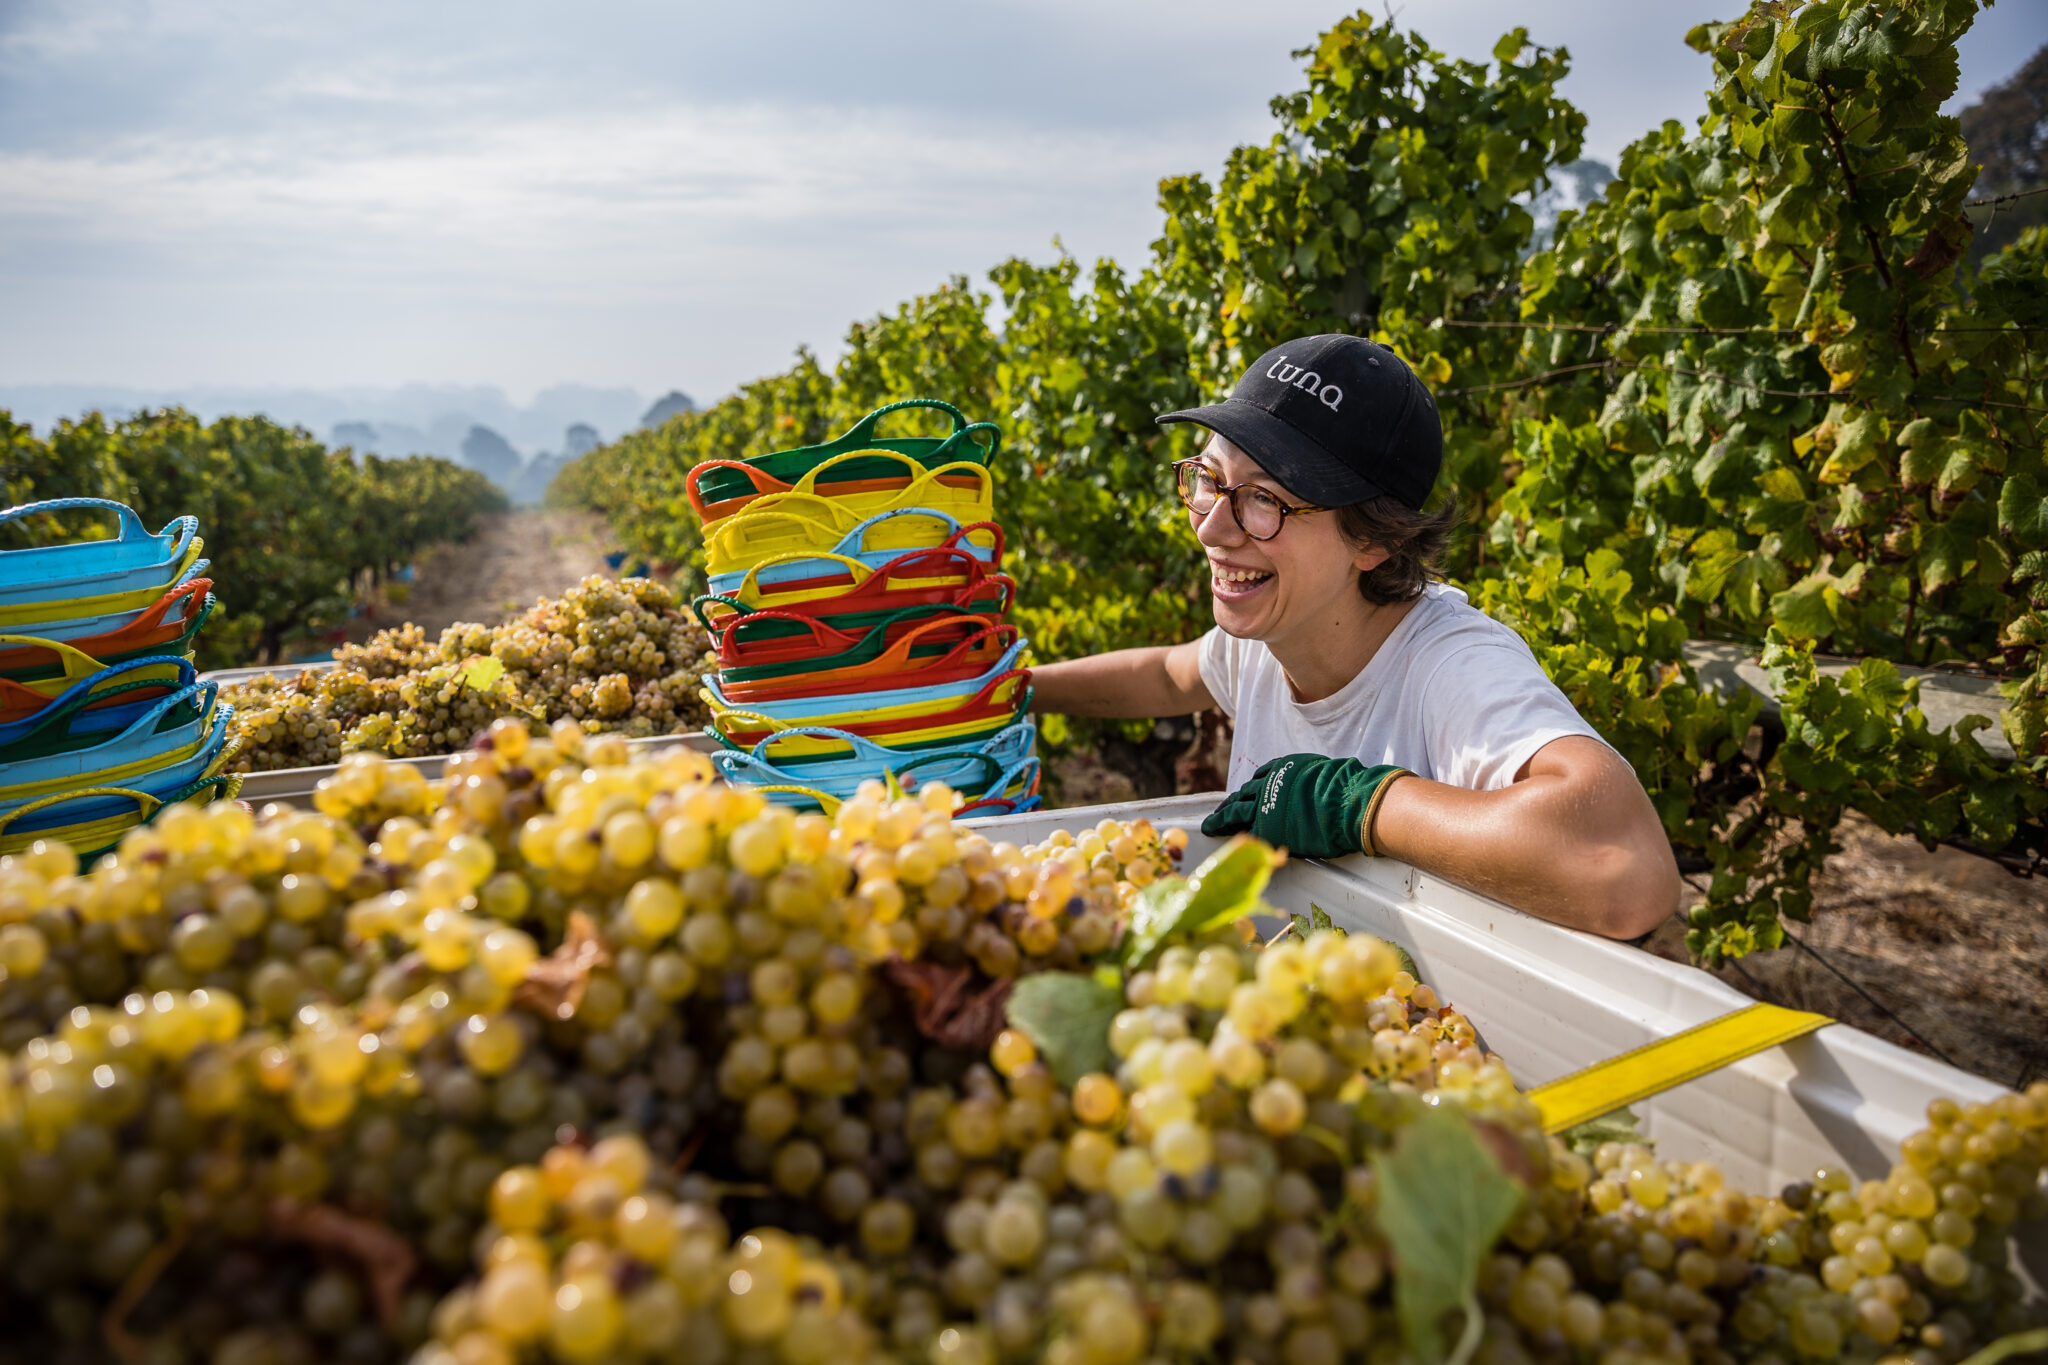 A worker laughing while leaning on a large tub full of grapes after being picked in a vineyard